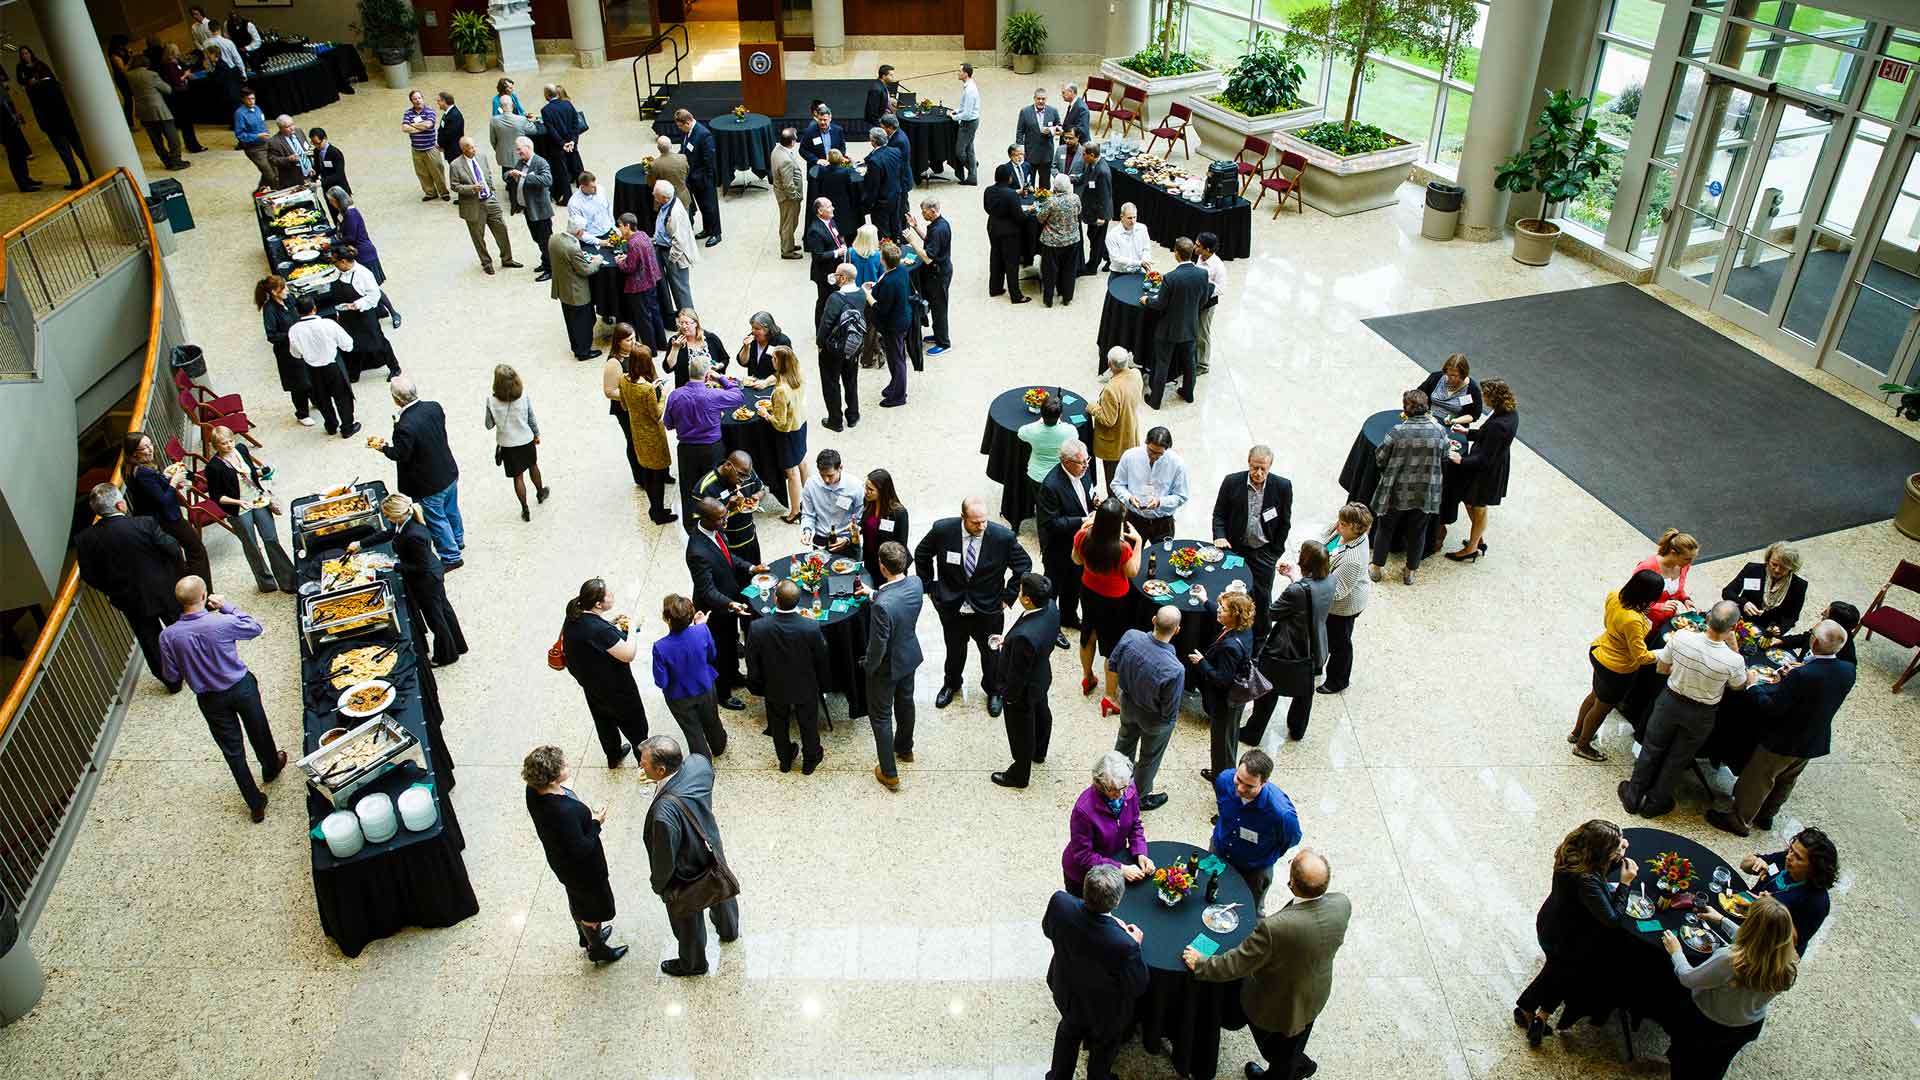 Looking down in atrium where attendees socialize during a reception